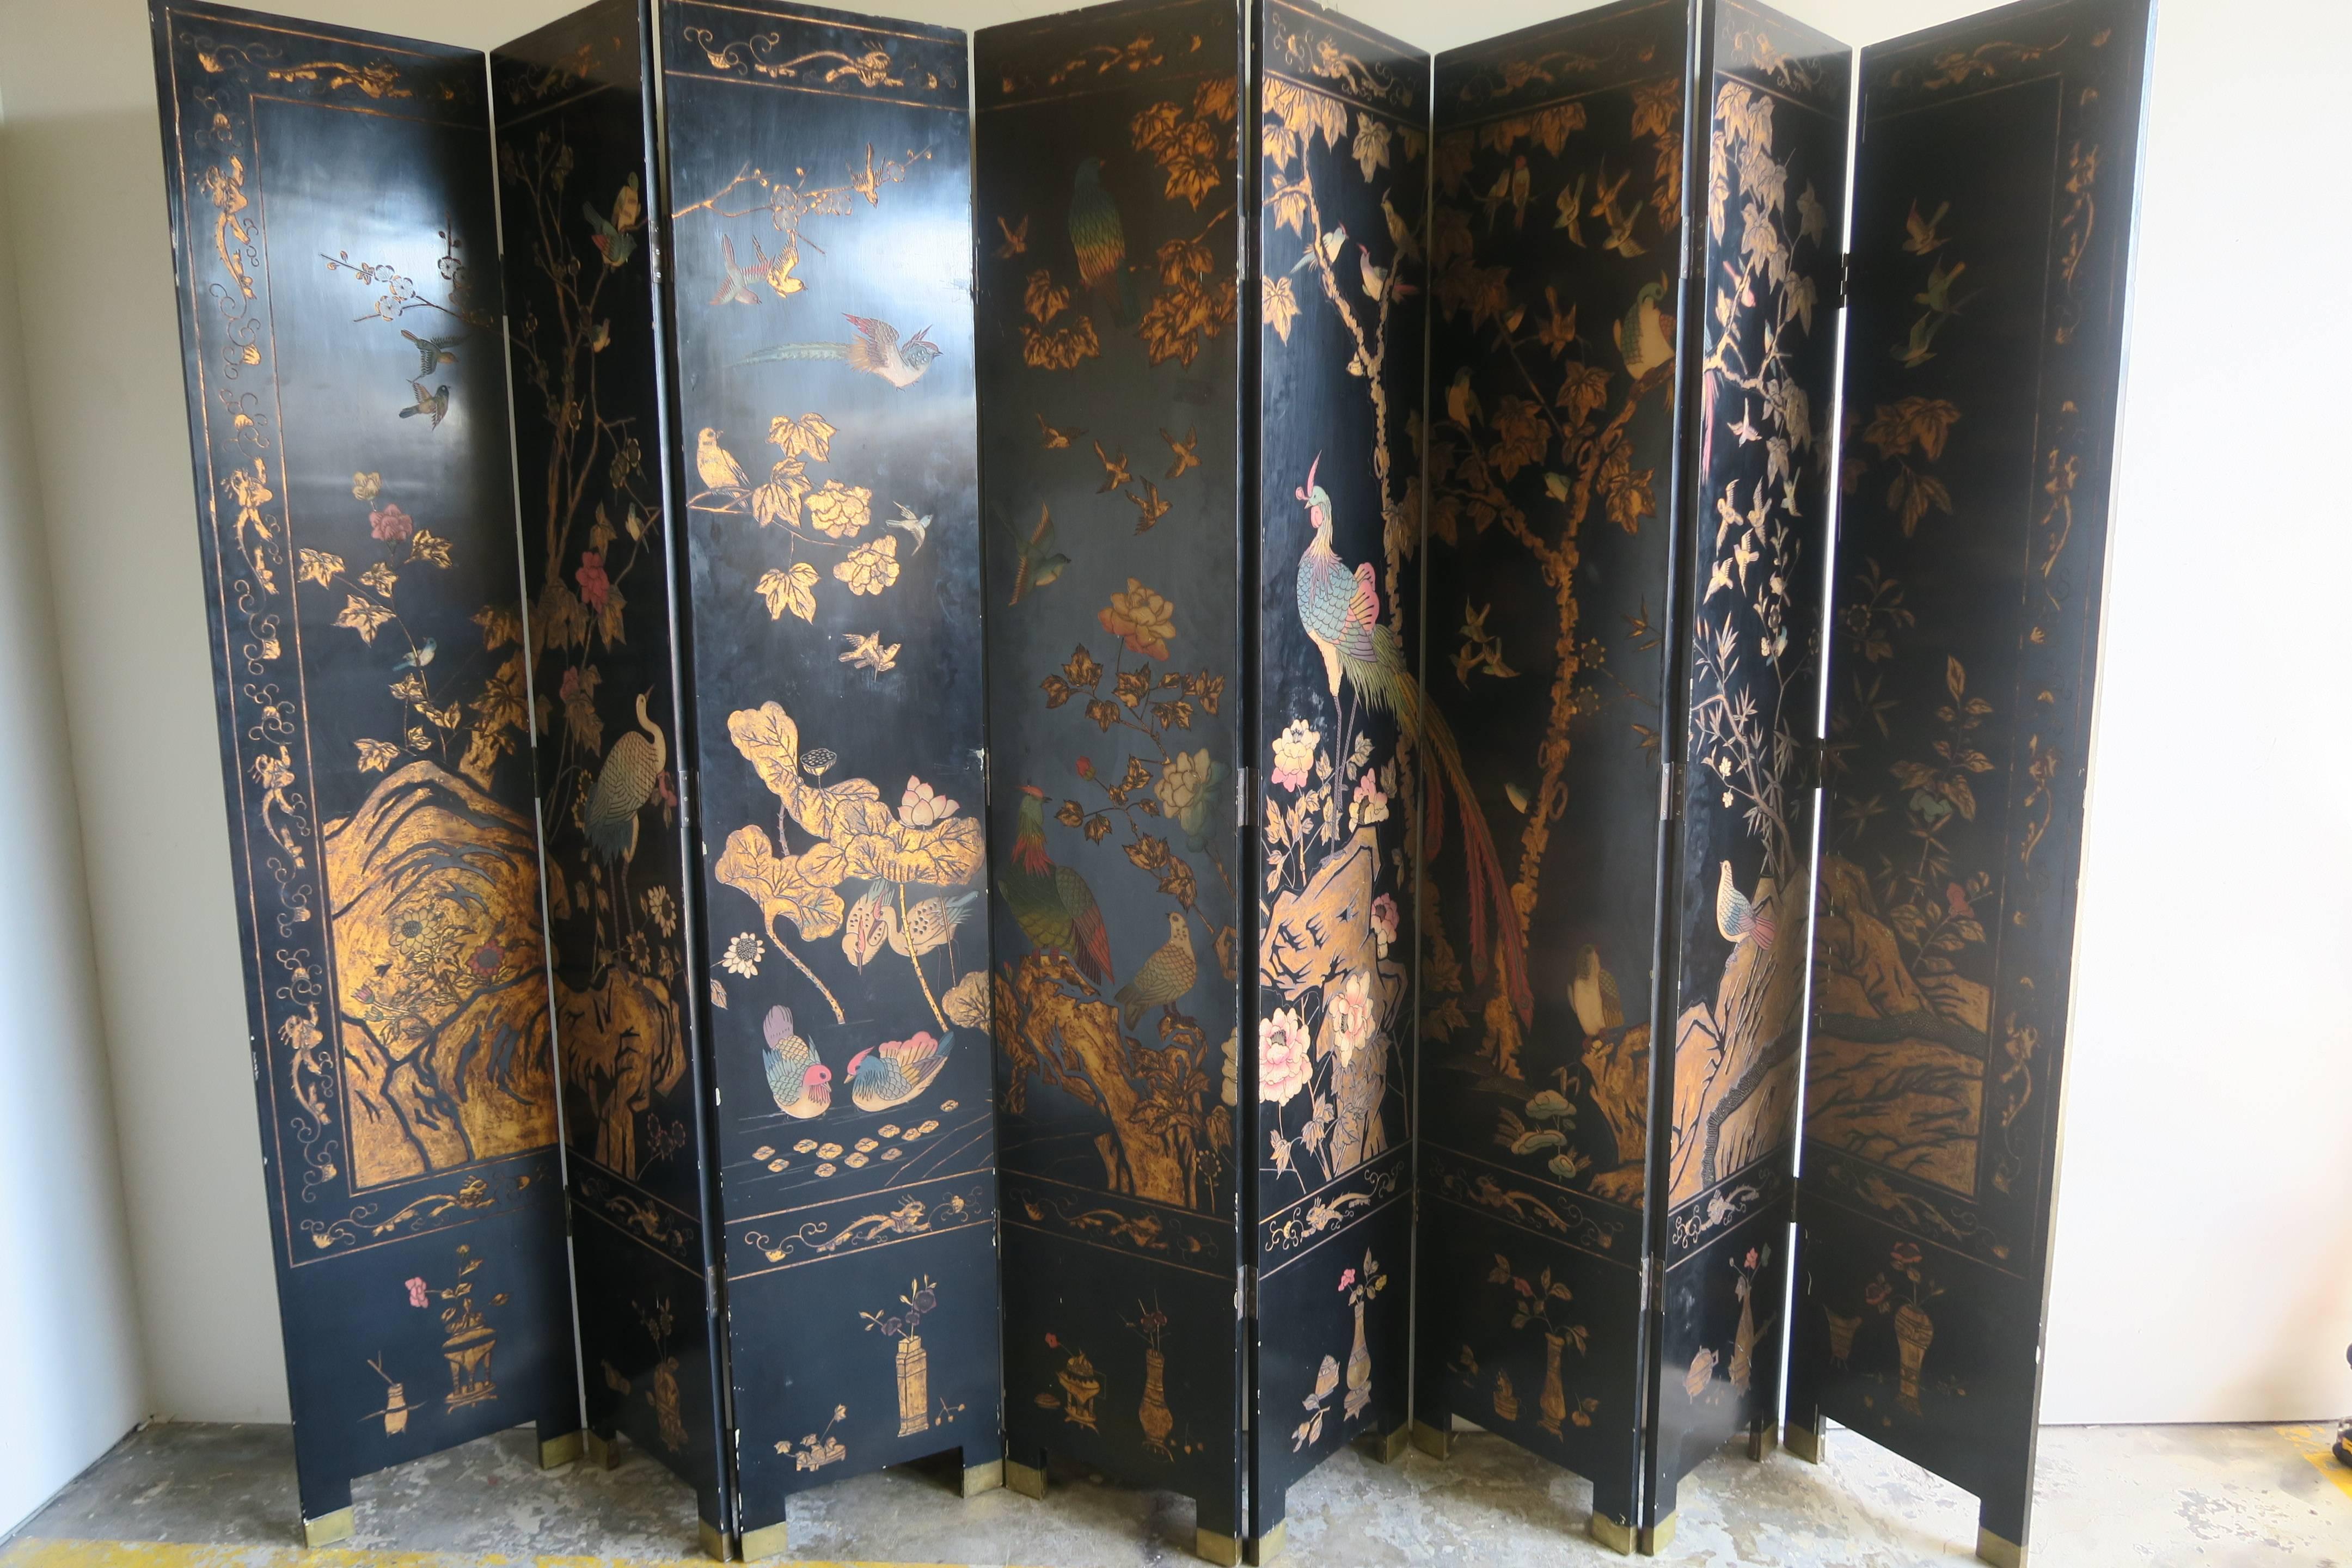 Monumental Chinese eight-panel folding Coromandel screen with double sided decoration. Featuring thick layers of lacquer incised with gold leaf and painted decoration depicting a variety of birds in a floral garden. Reminiscent of the large gilt